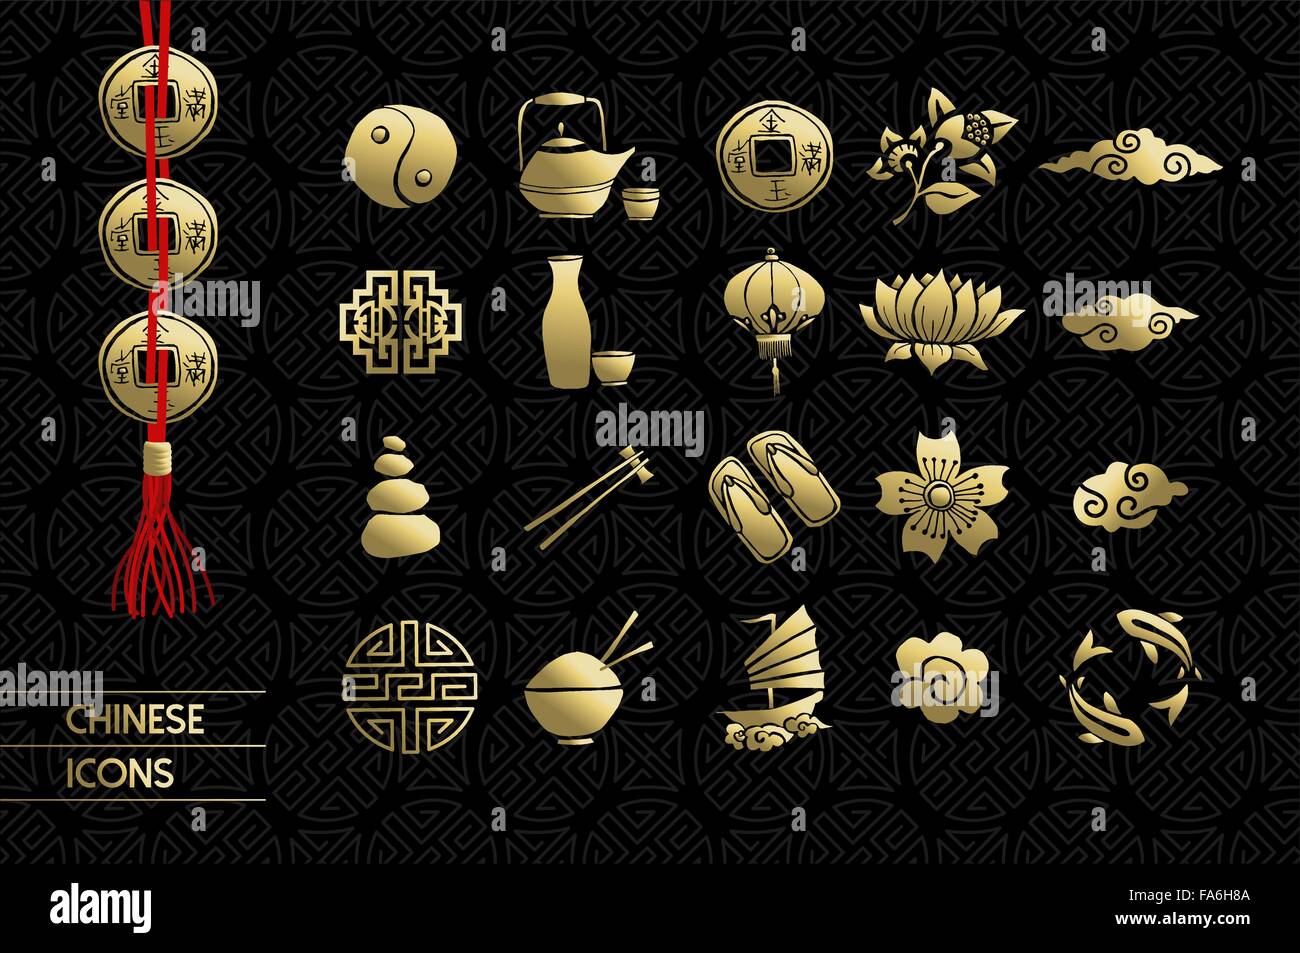 Gold chinese icons set. Includes lotus flower, traditional culture elements and decoration. EPS10 vector. Stock Vector